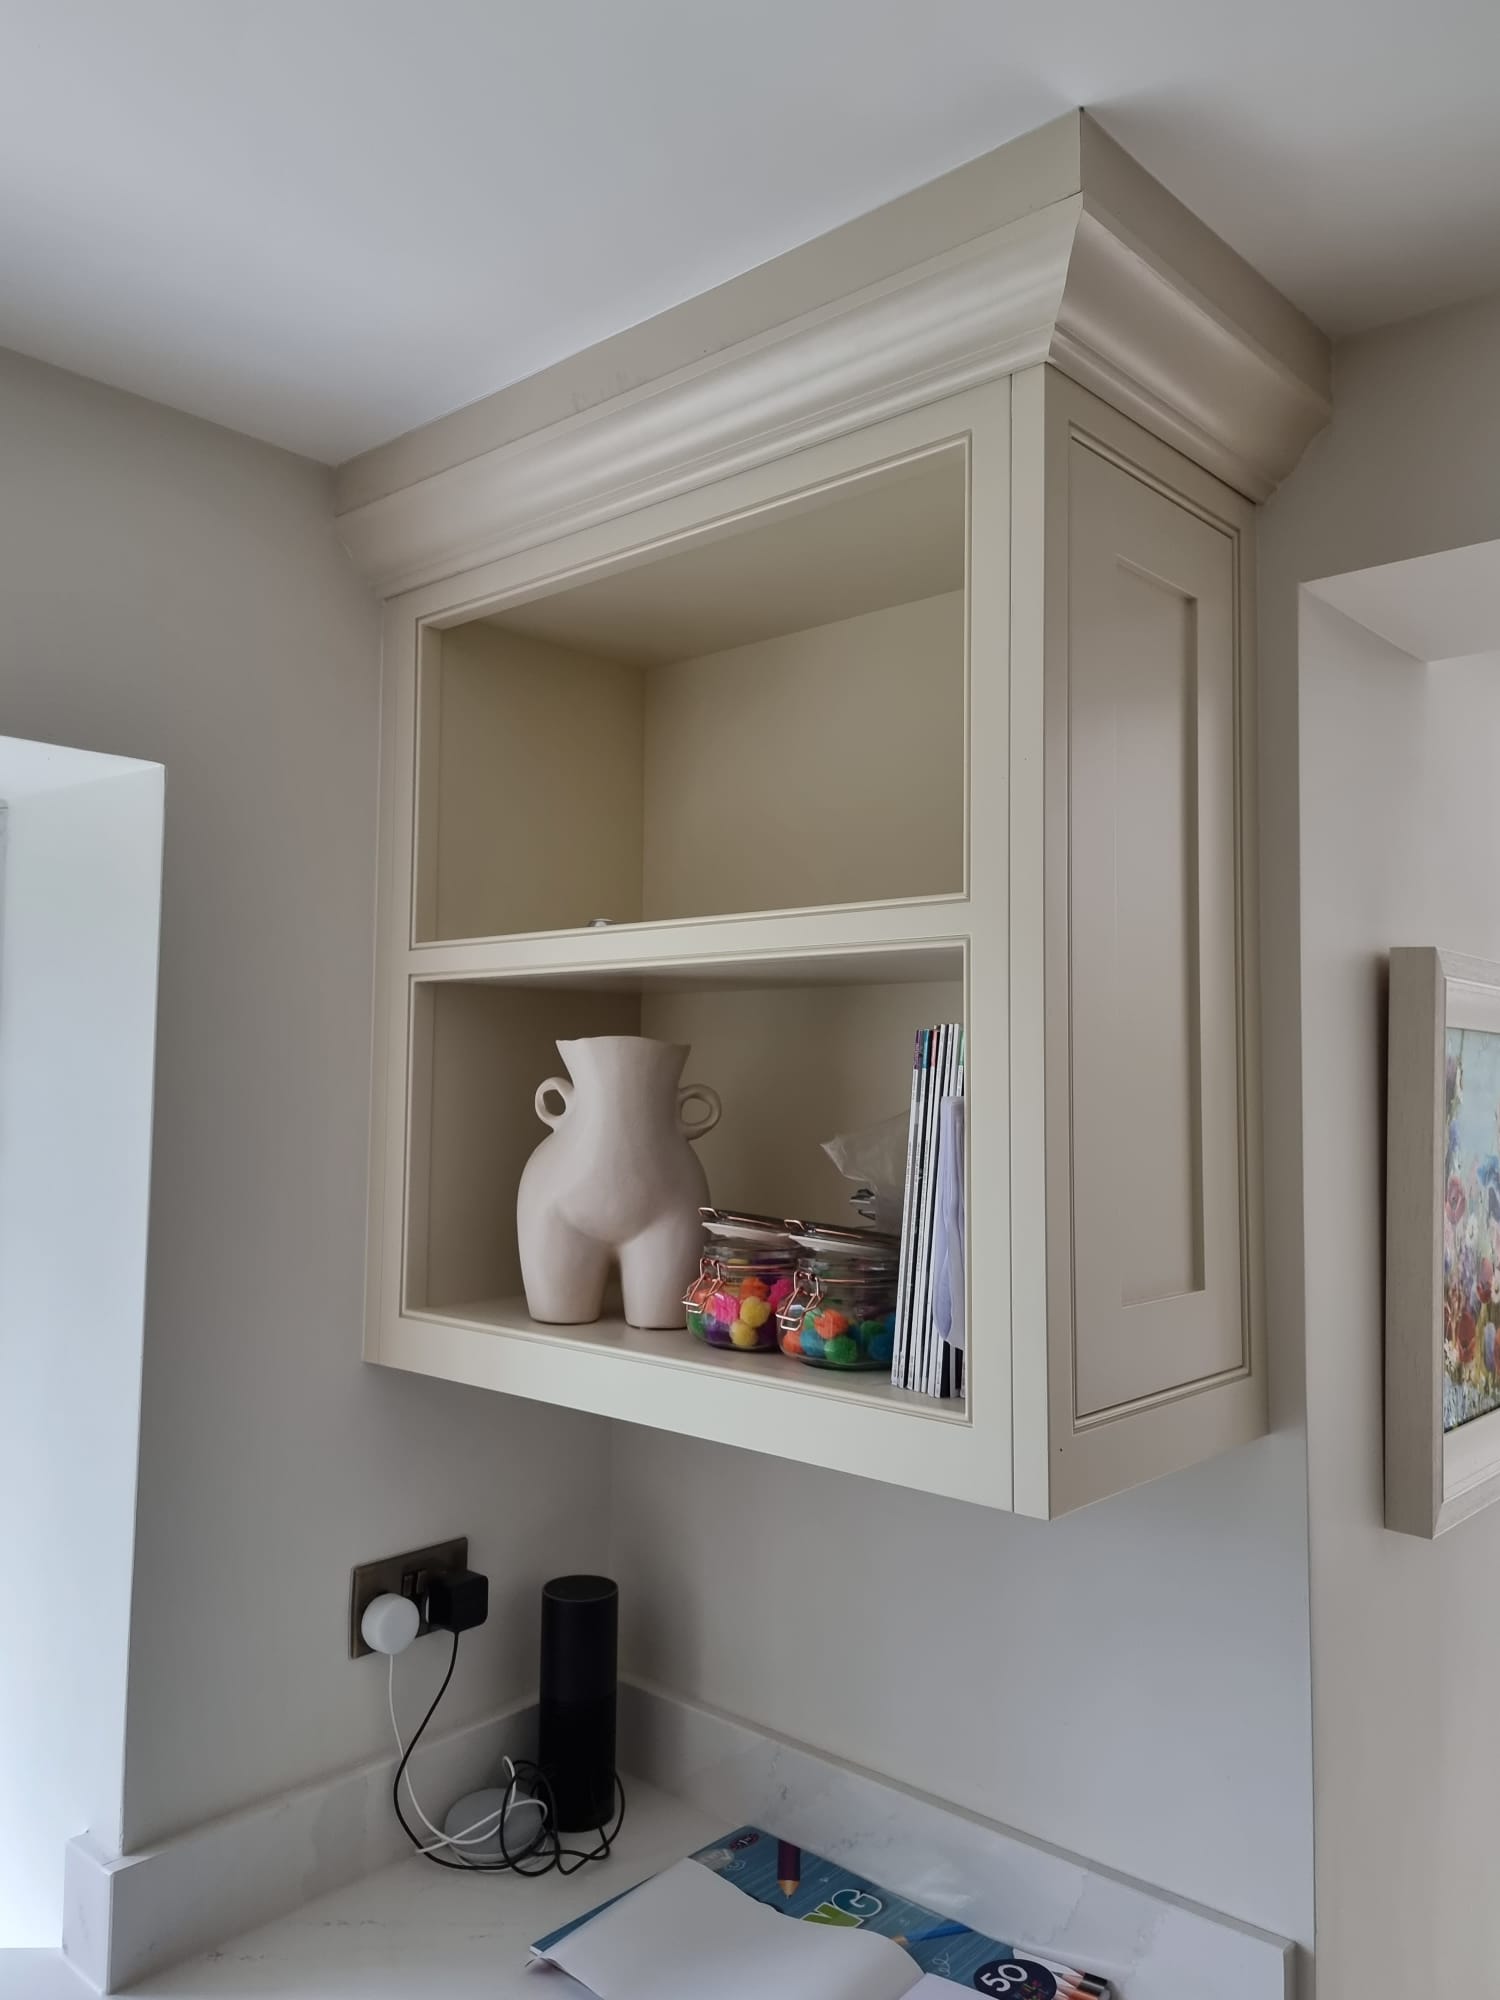 Bespoke timber kitchen shelving by Kings Stag Joinery